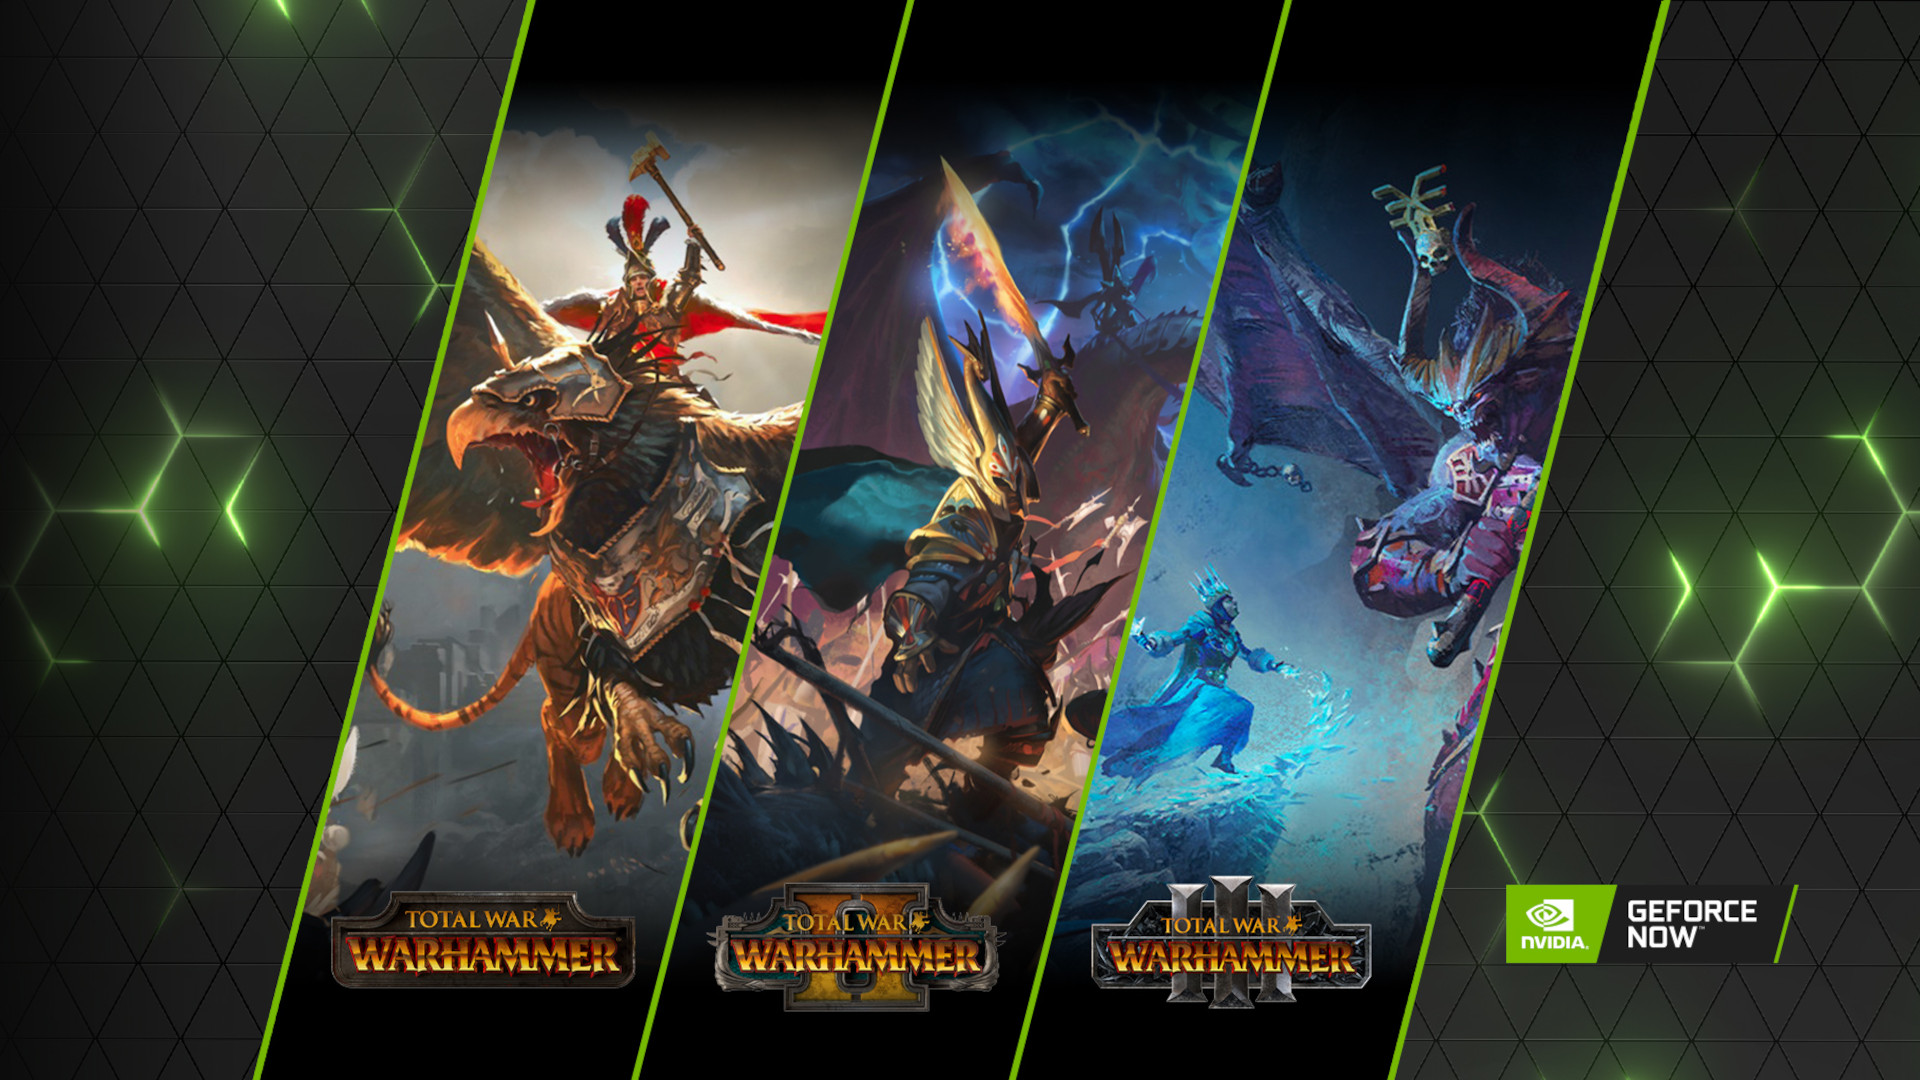 Snippets of the cover art for each entry in the Total Warhammer series lined against one another